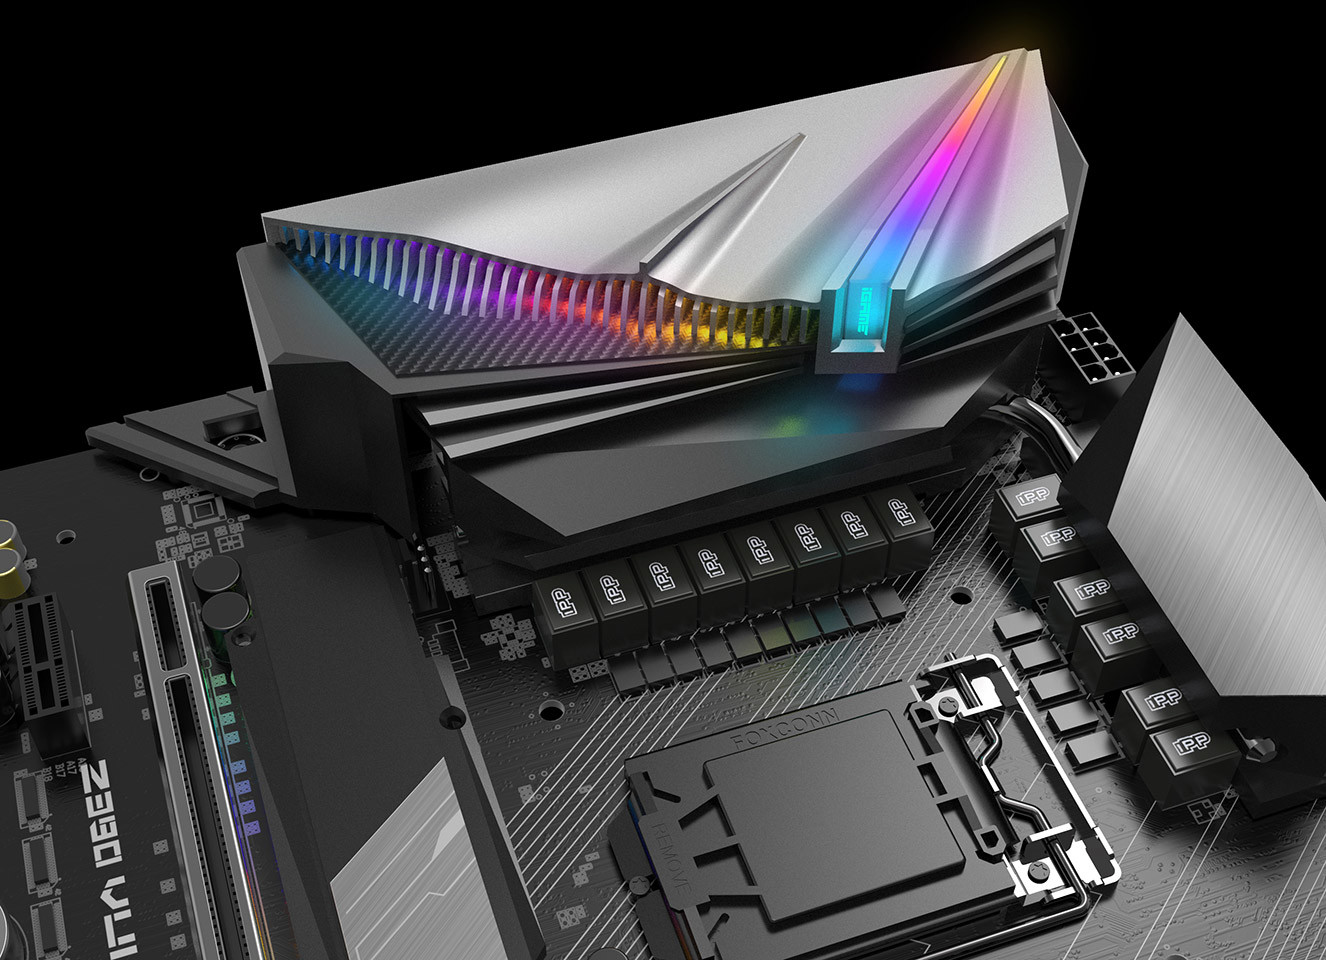 COLORFUL iGame Z390 Vulcan X Motherboard